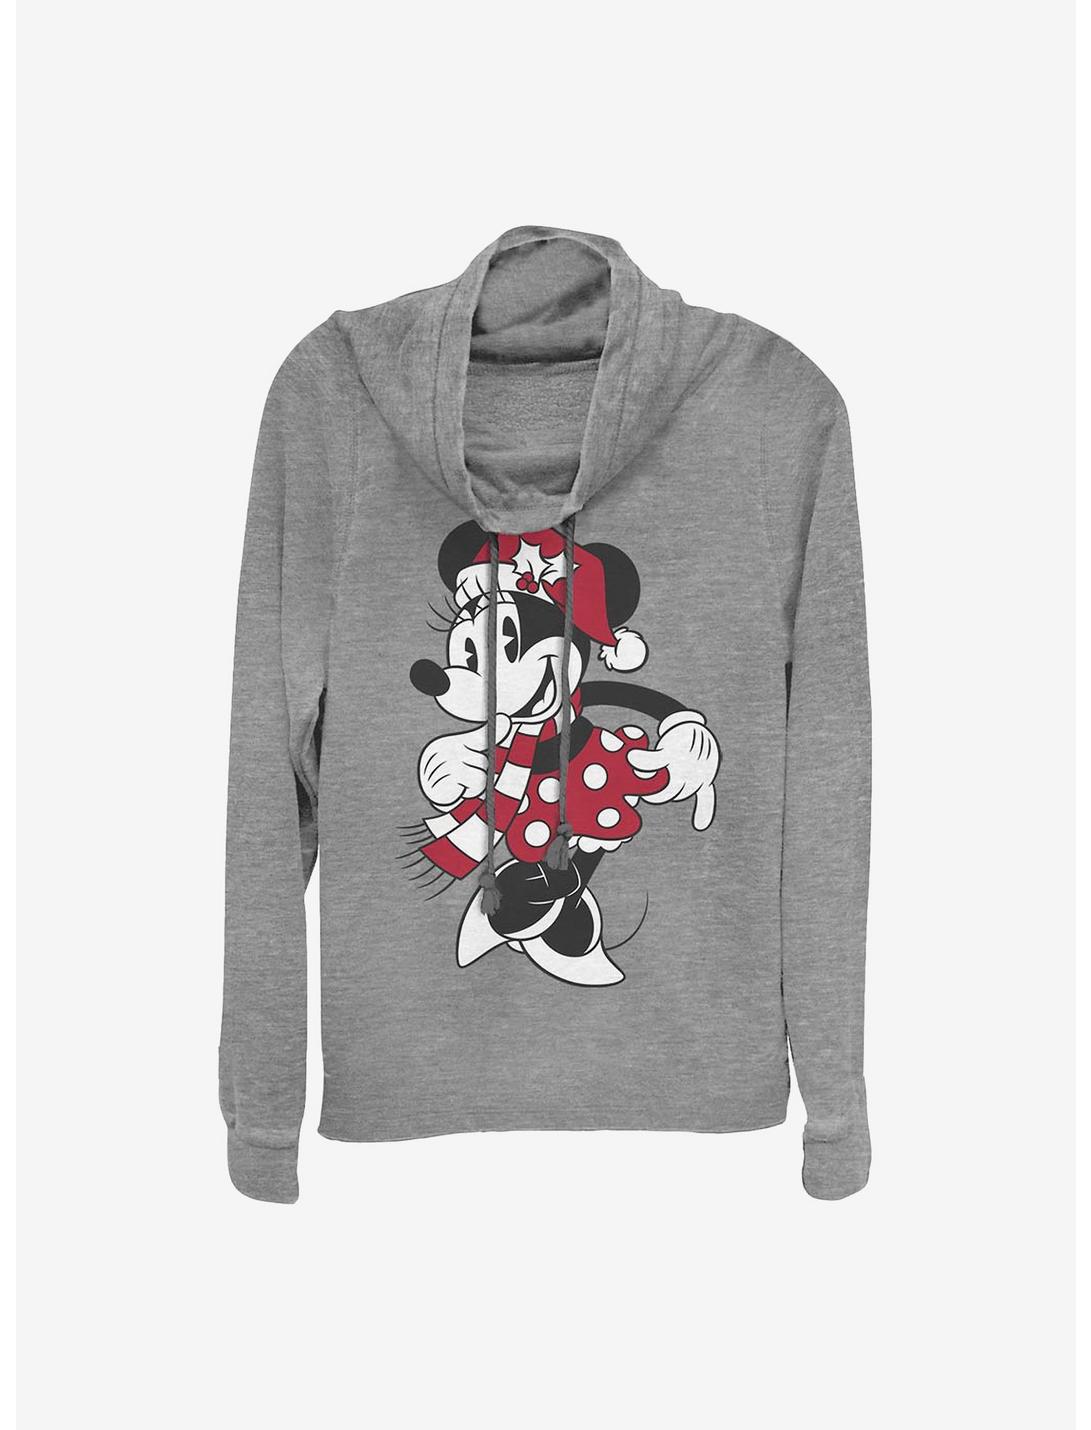 Disney Minnie Mouse Minnie Hat Cowlneck Long-Sleeve Girls Top, GRAY HTR, hi-res